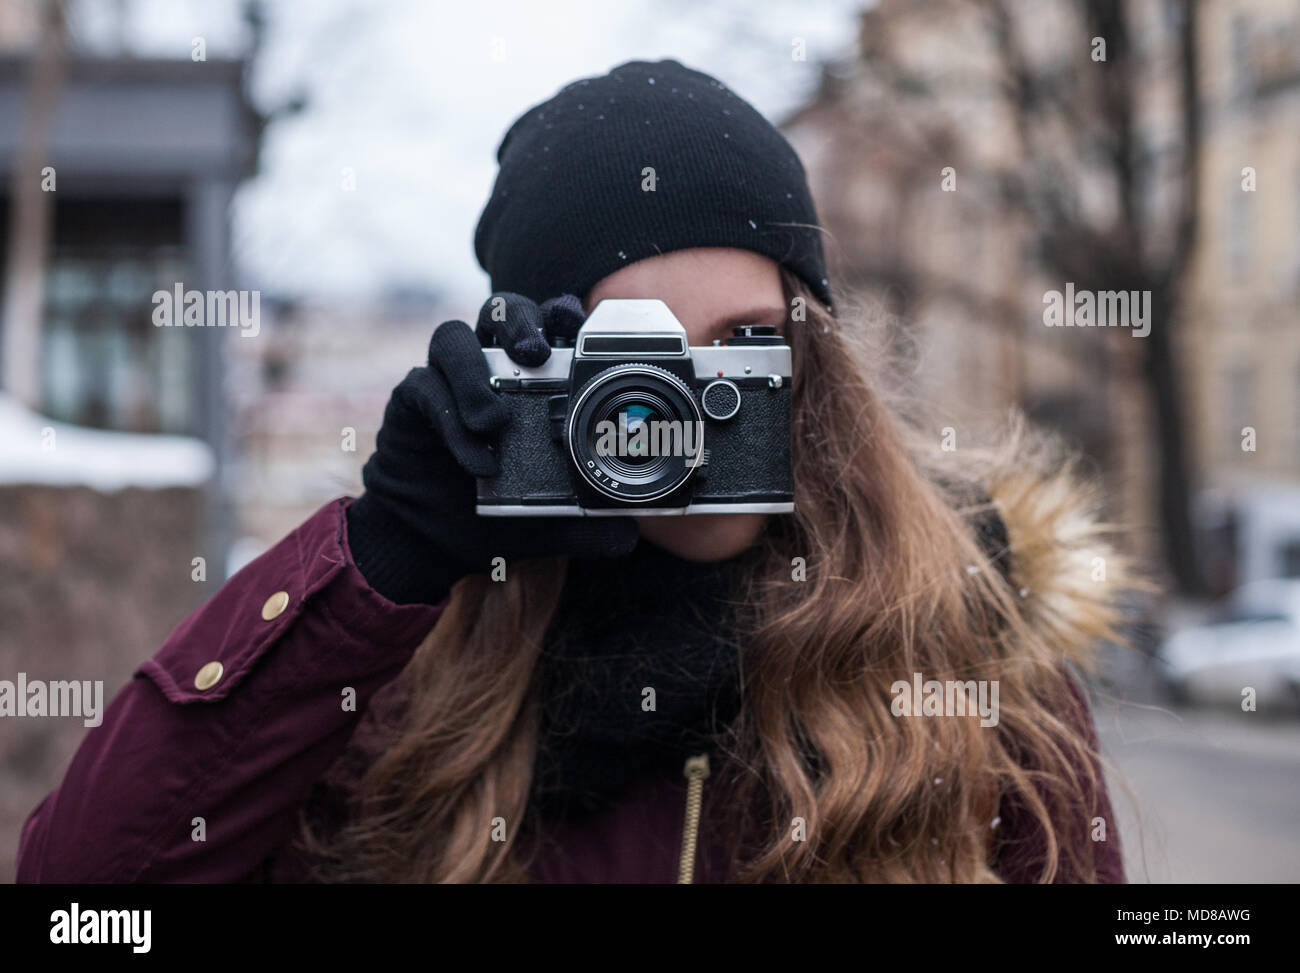 Hipster girl photographer with retro camera taking photo on city street Stock Photo